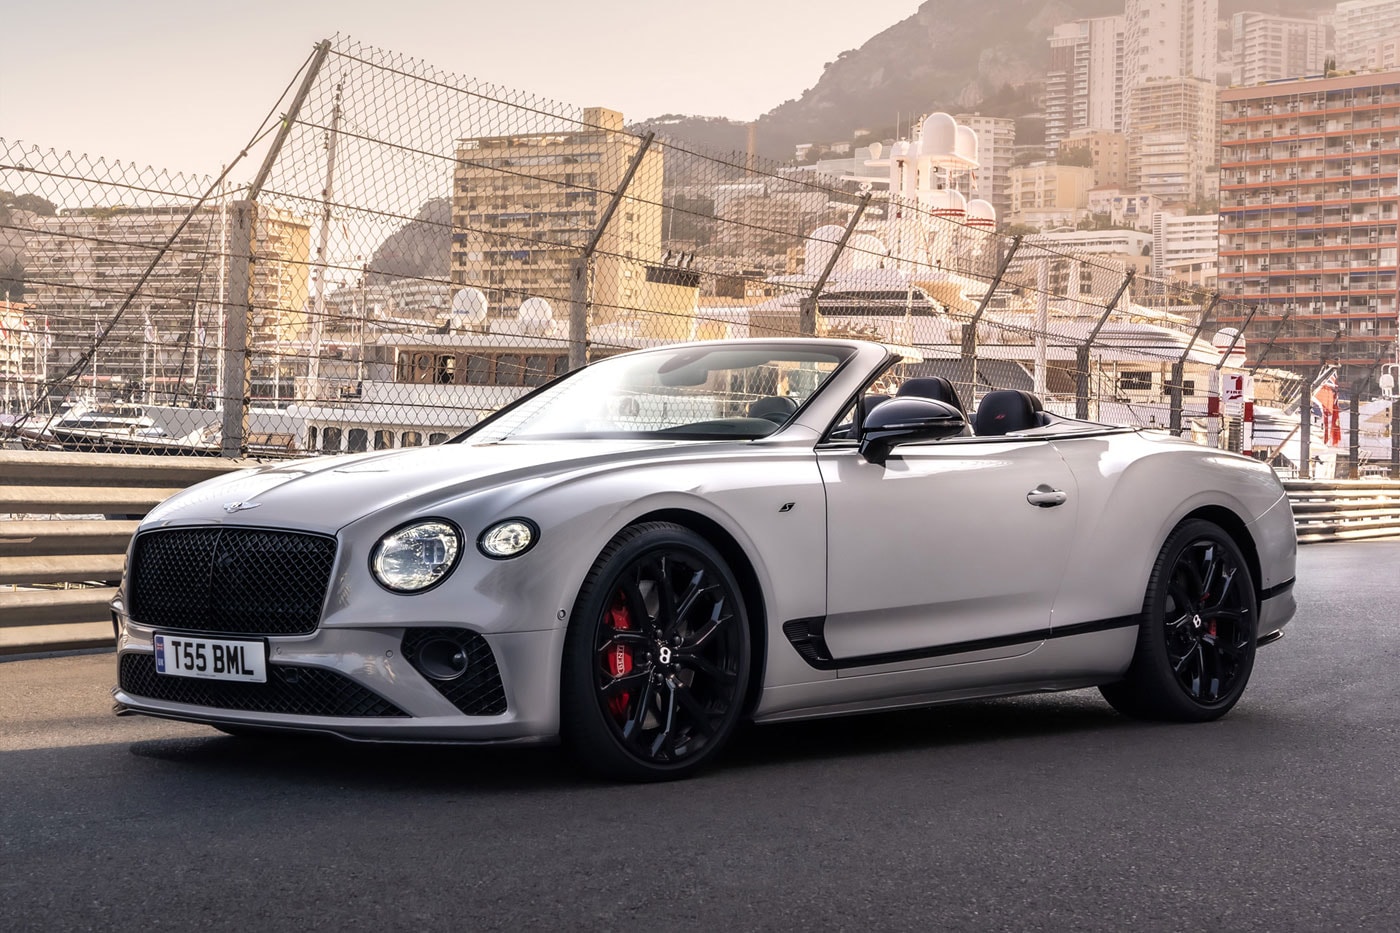 Bentley Unveils All New Continental GT S twin turbo gtc 22 inch wheels badging range release info date price